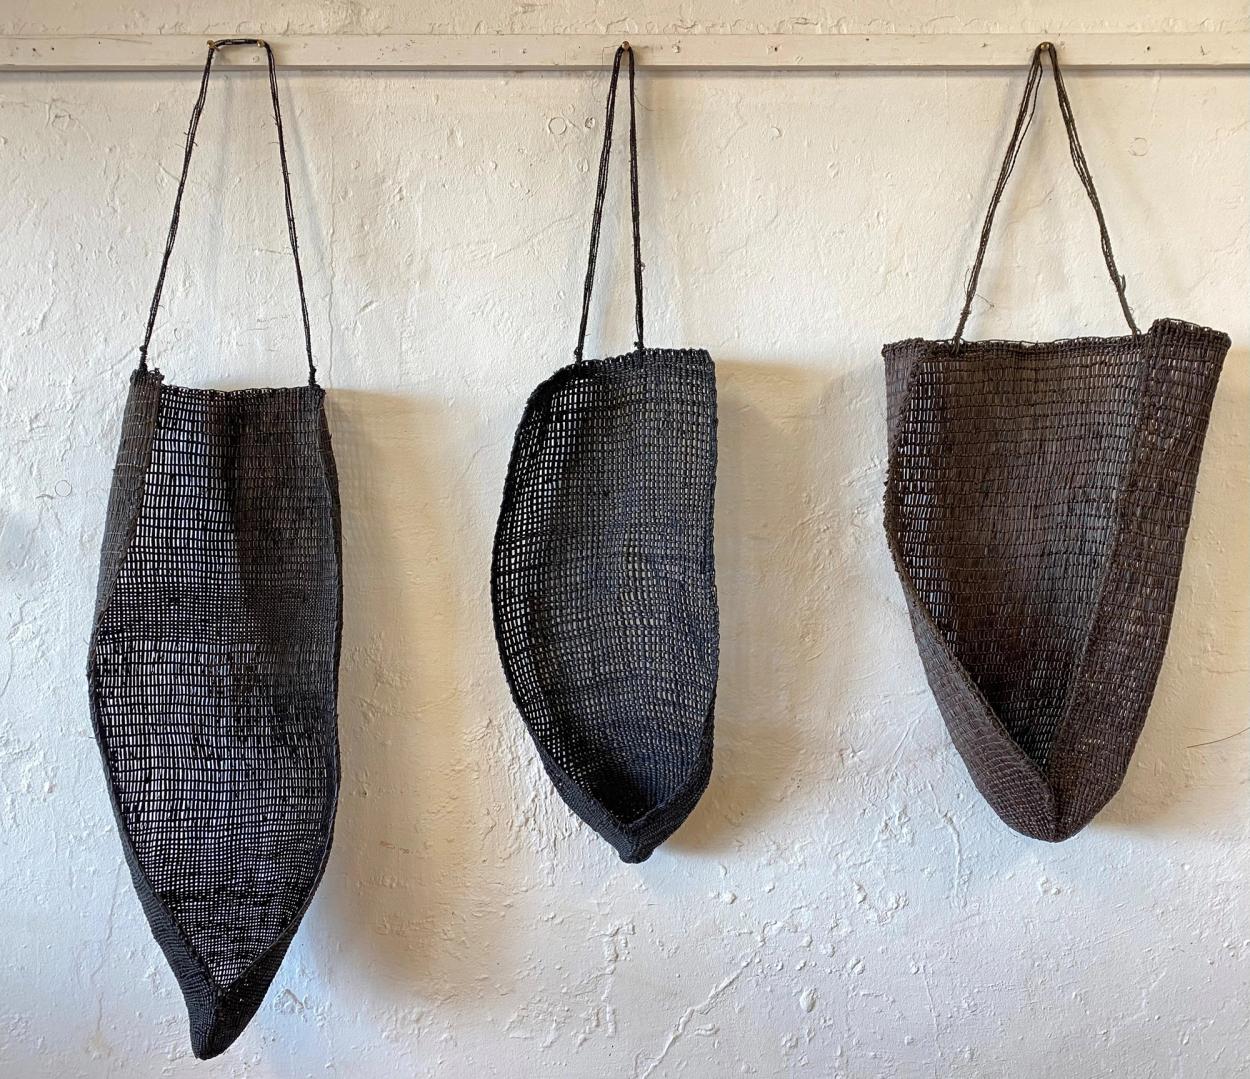 Three black woven artworks hanging in a row.